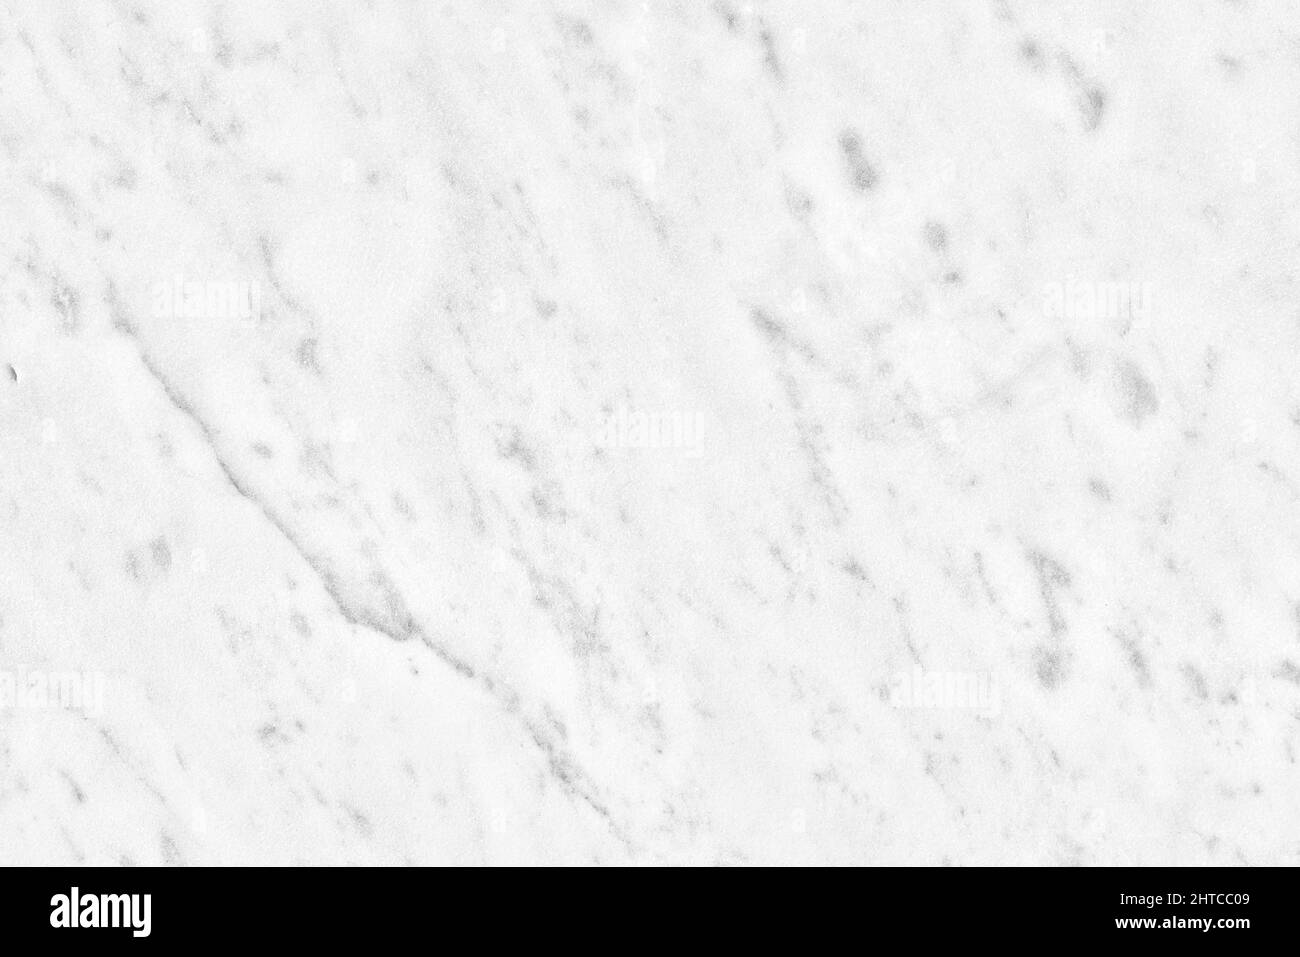 White Carrara Marble texture, background or pattern for bathroom or kitchen white countertop. High resolution. Stock Photo